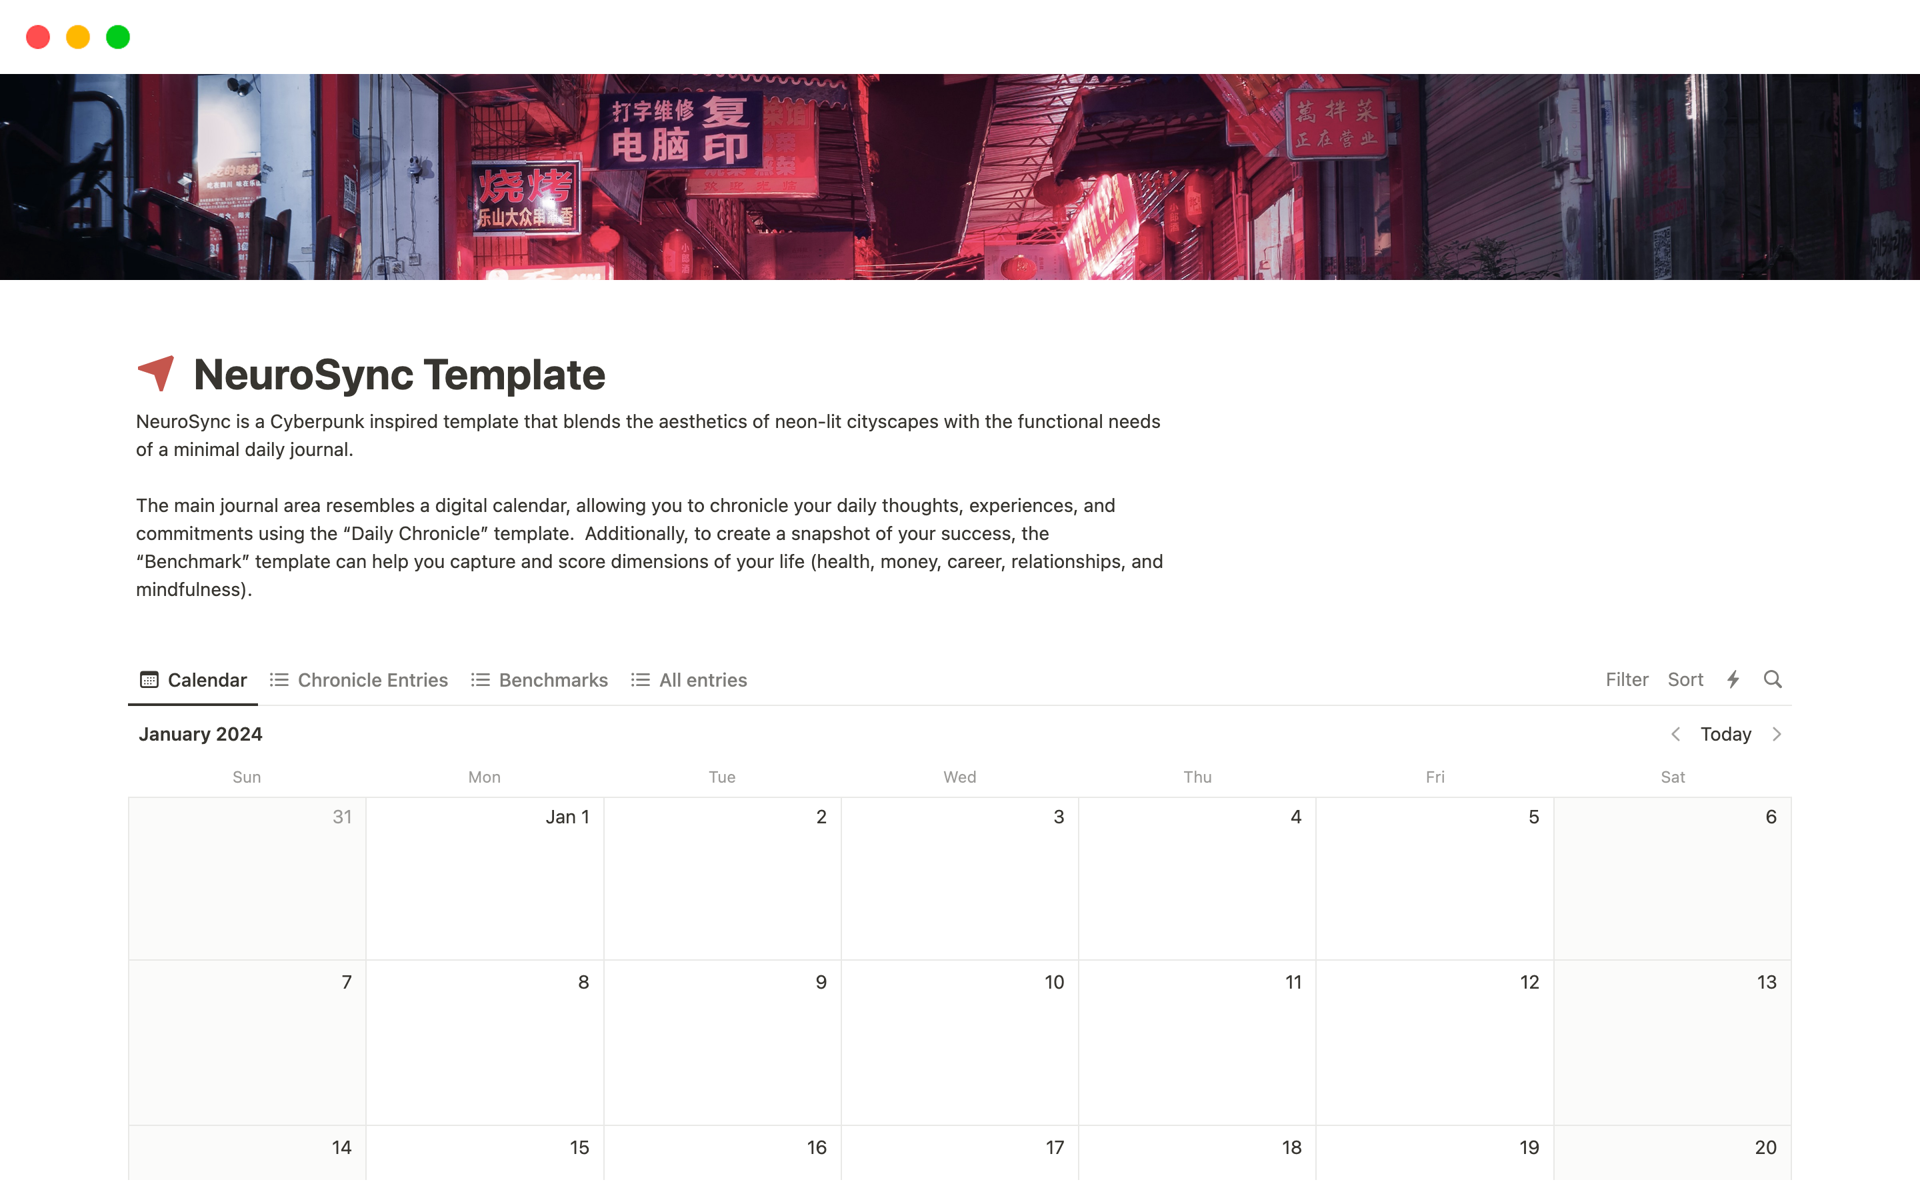 NeuroSync is a Cyberpunk inspired template that blends the aesthetics of neon-lit cityscapes with the functional needs of a minimal daily journal. 